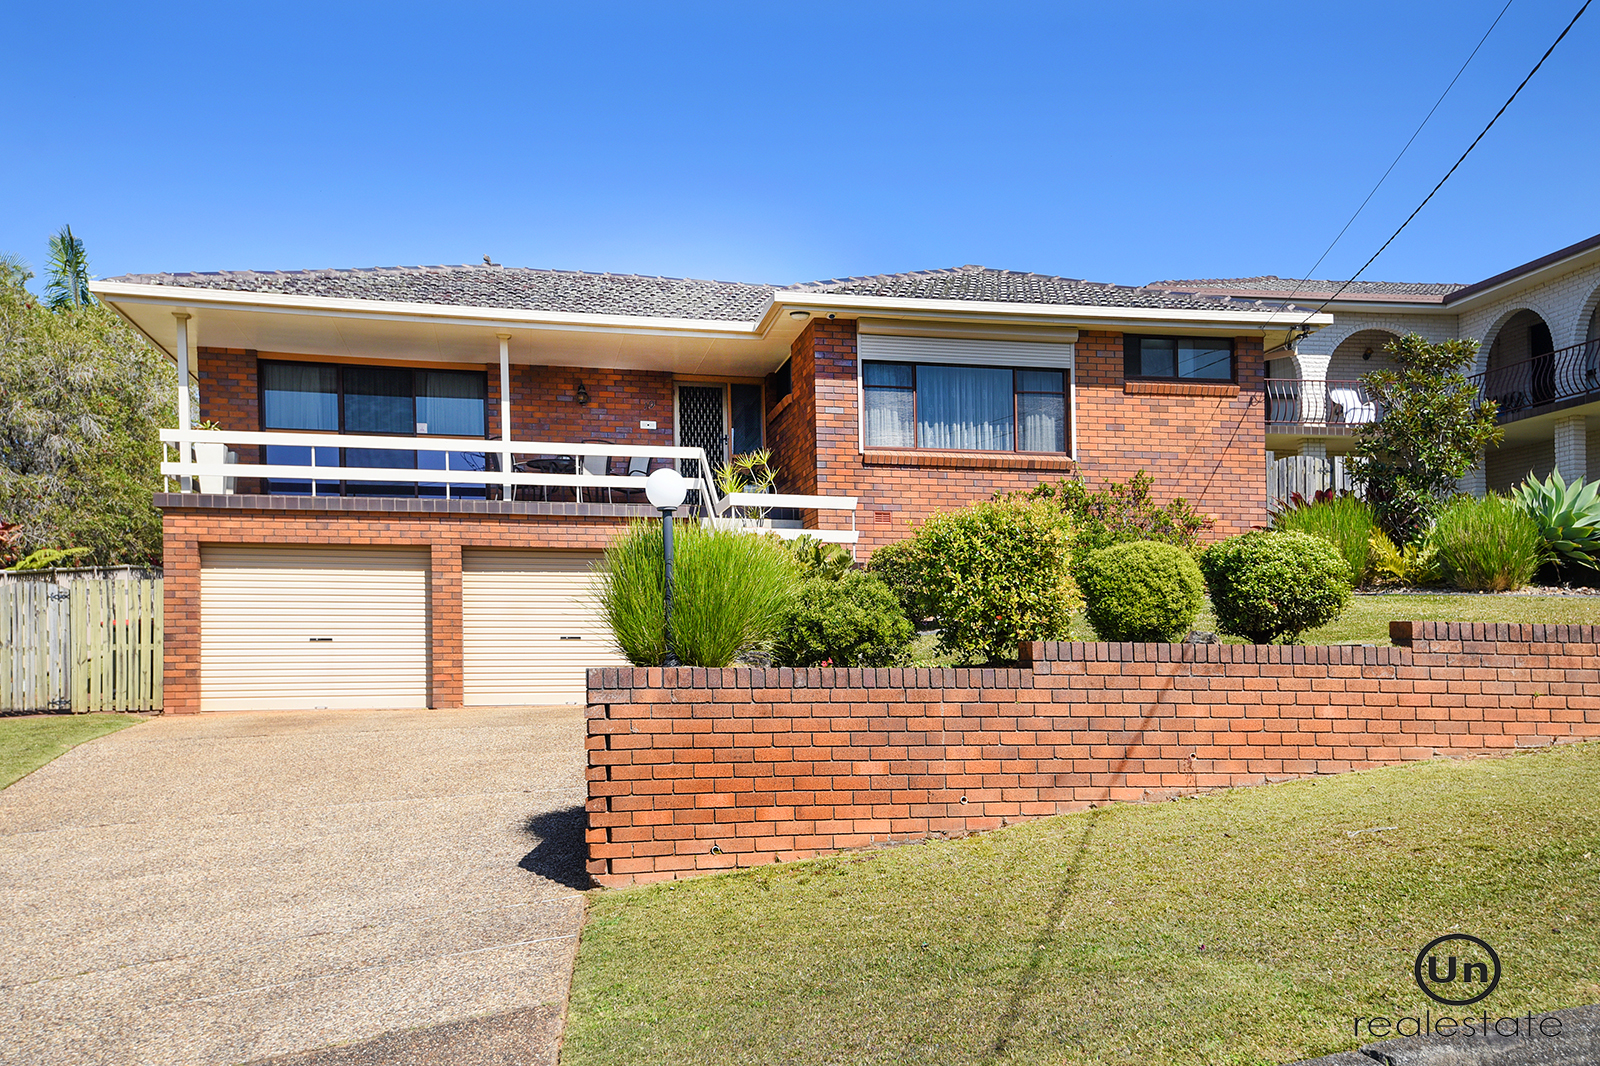 19 Ramornie Drive, Toormina - Front of house